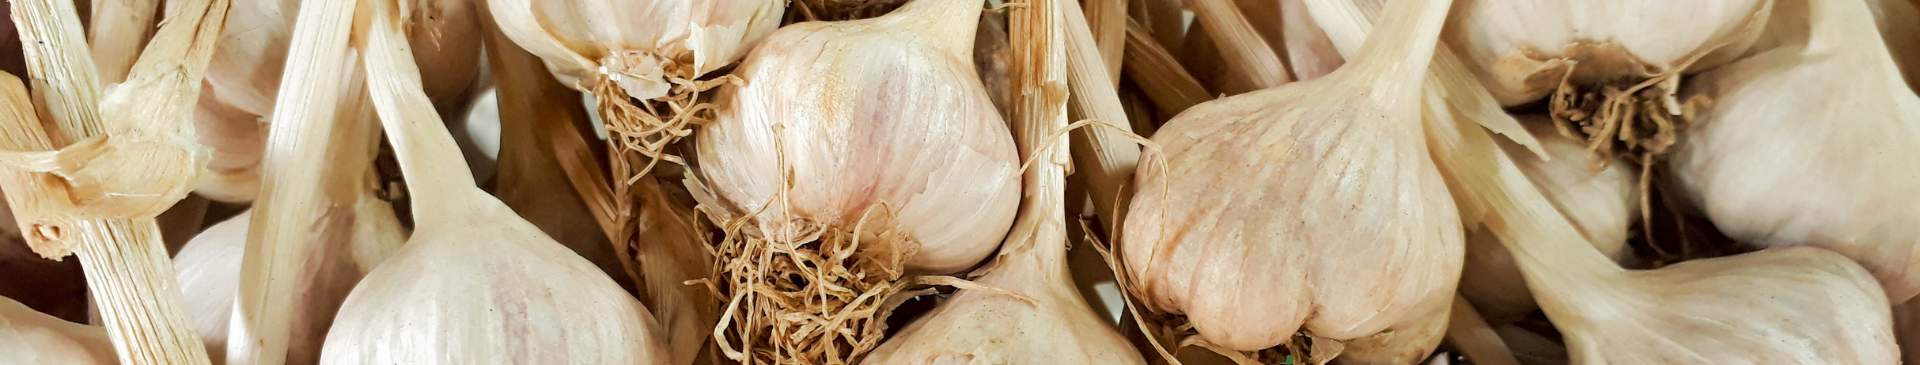 How to Harvest and Cure Garlic